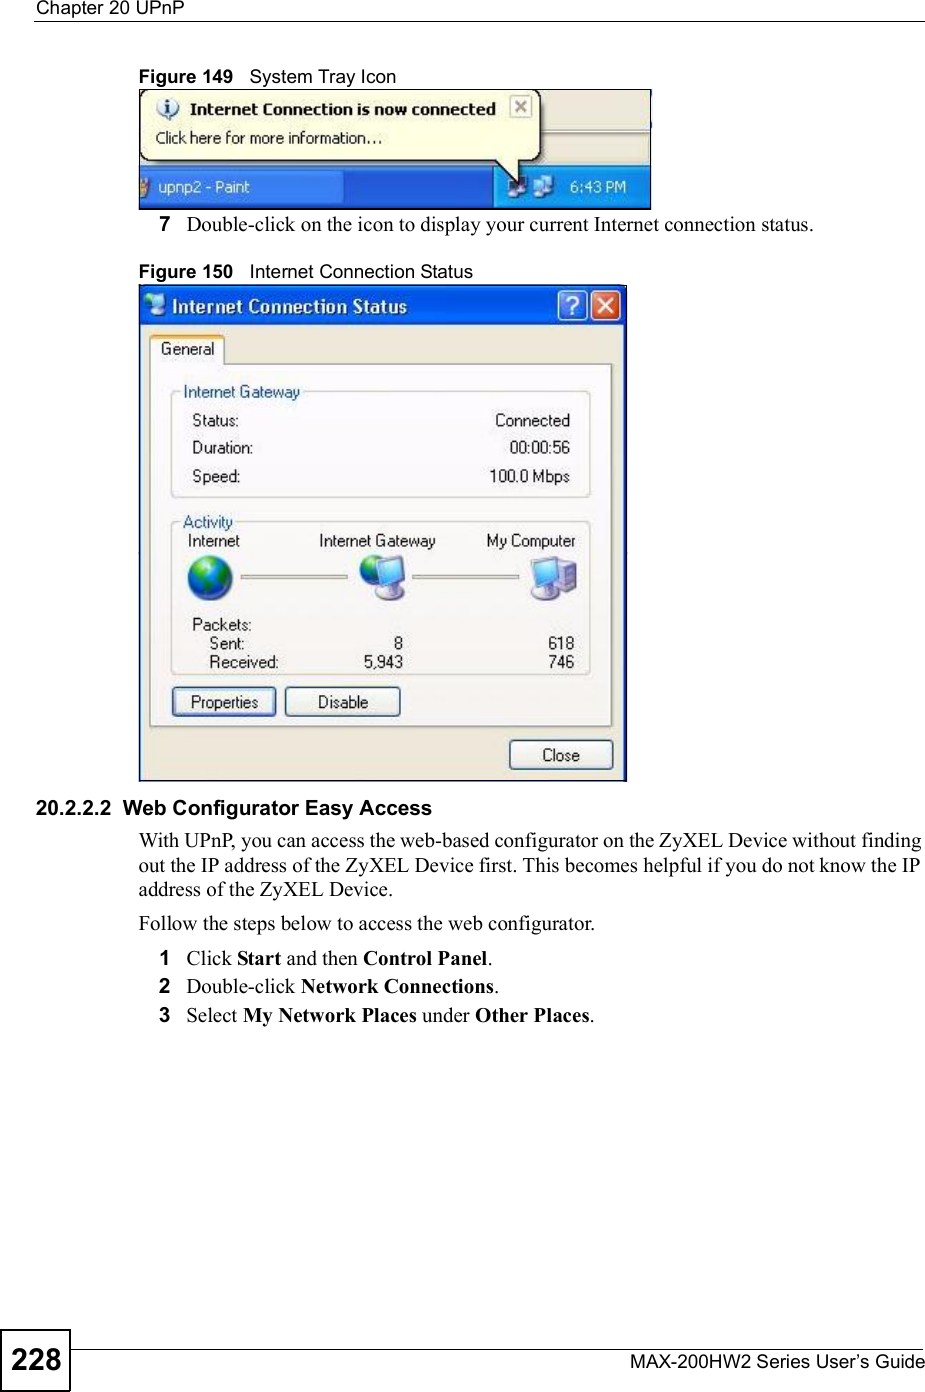 Chapter 20UPnPMAX-200HW2 Series User s Guide228Figure 149   System Tray Icon7Double-click on the icon to display your current Internet connection status.Figure 150   Internet Connection Status20.2.2.2  Web Configurator Easy AccessWith UPnP, you can access the web-based configurator on the ZyXEL Device without finding out the IP address of the ZyXEL Device first. This becomes helpful if you do not know the IP address of the ZyXEL Device.Follow the steps below to access the web configurator.1Click Start and then Control Panel.2Double-click Network Connections.3Select My Network Places under Other Places.